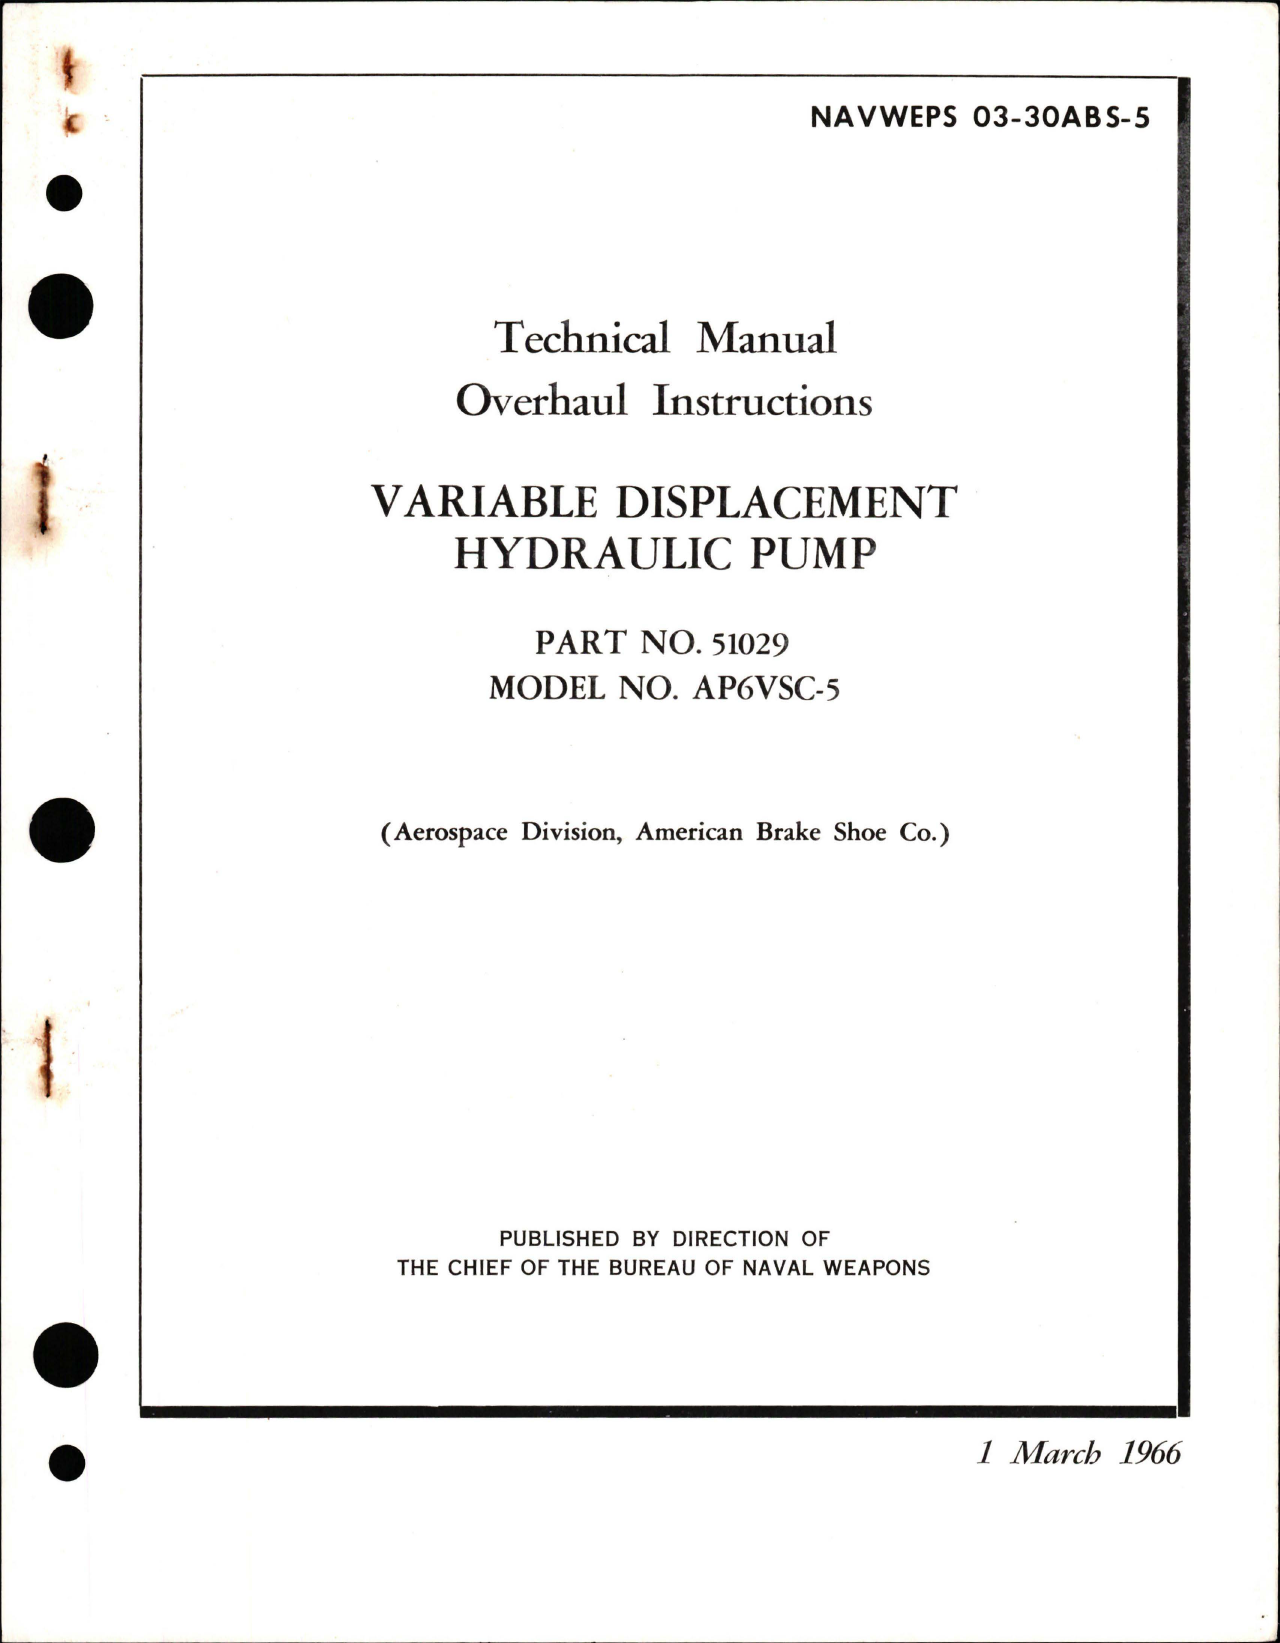 Sample page 1 from AirCorps Library document: Overhaul Instructions for Variable Displacement Hydraulic Pump - Part 51029 - Model AP6VSC-5